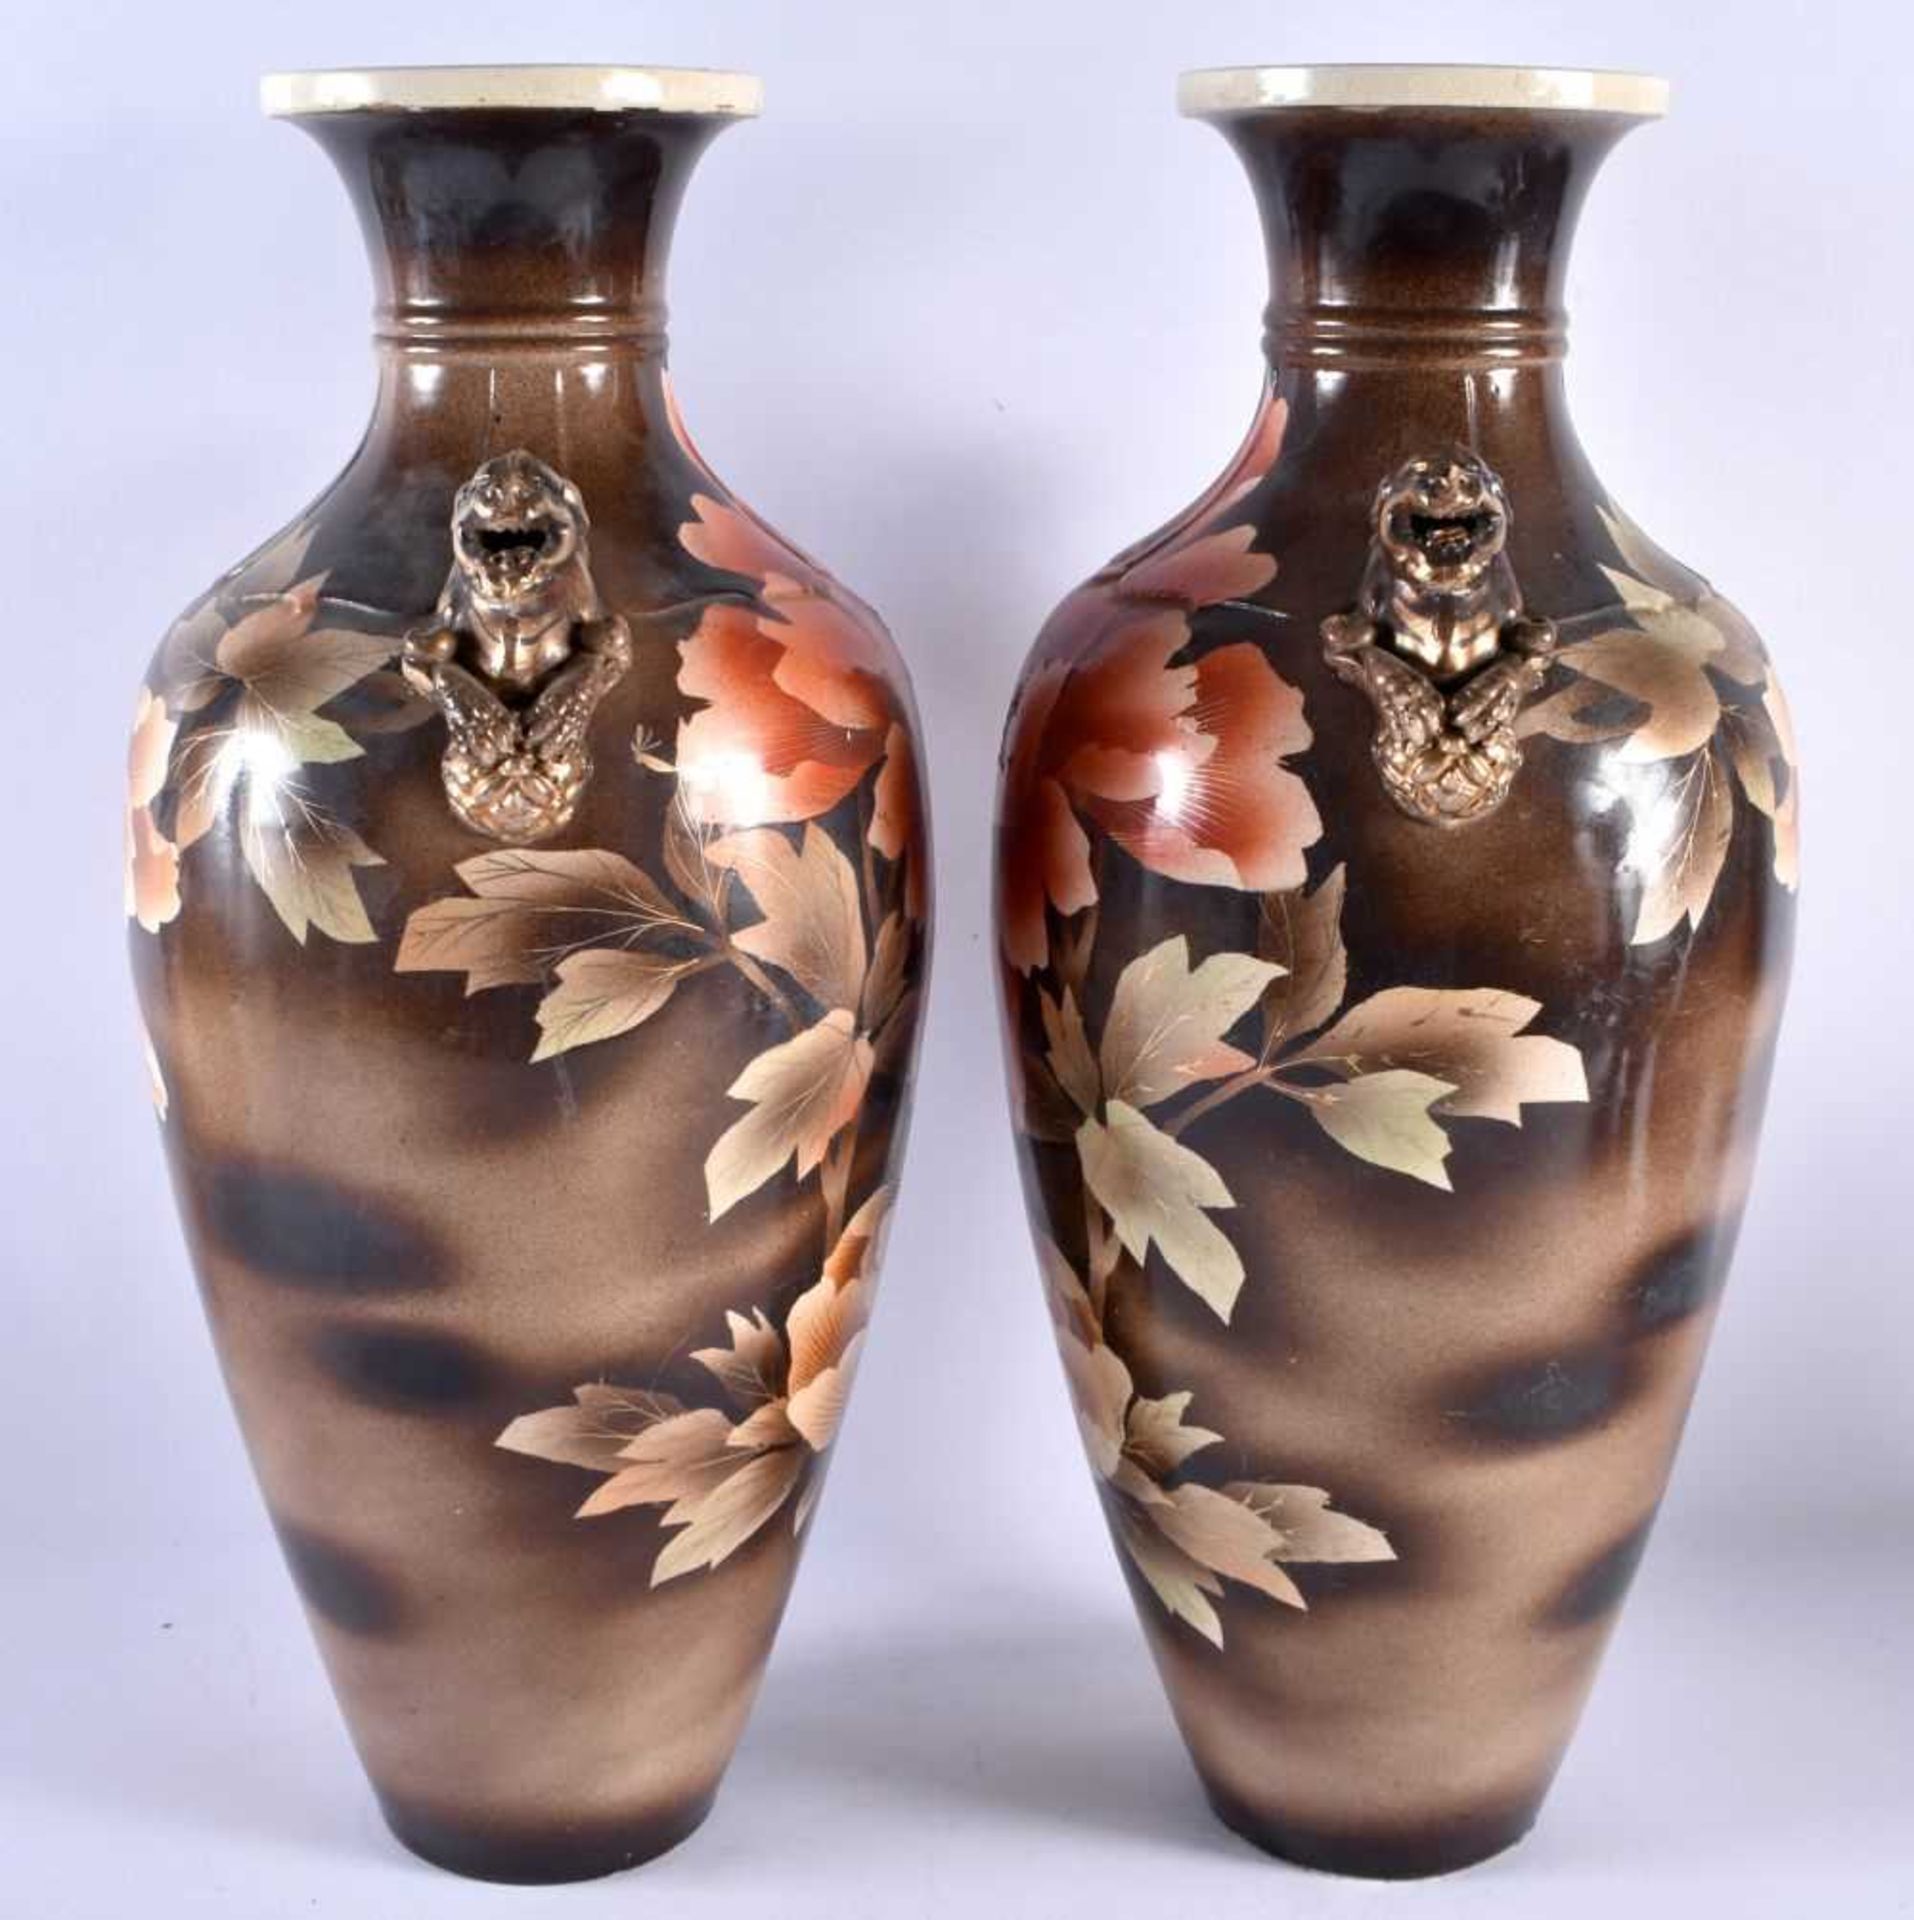 A LARGE PAIR OF LATE 19TH CENTURY JAPANESE MEIJI PERIOD SATSUMA VASES. 44 cm x 18 cm. - Image 4 of 23